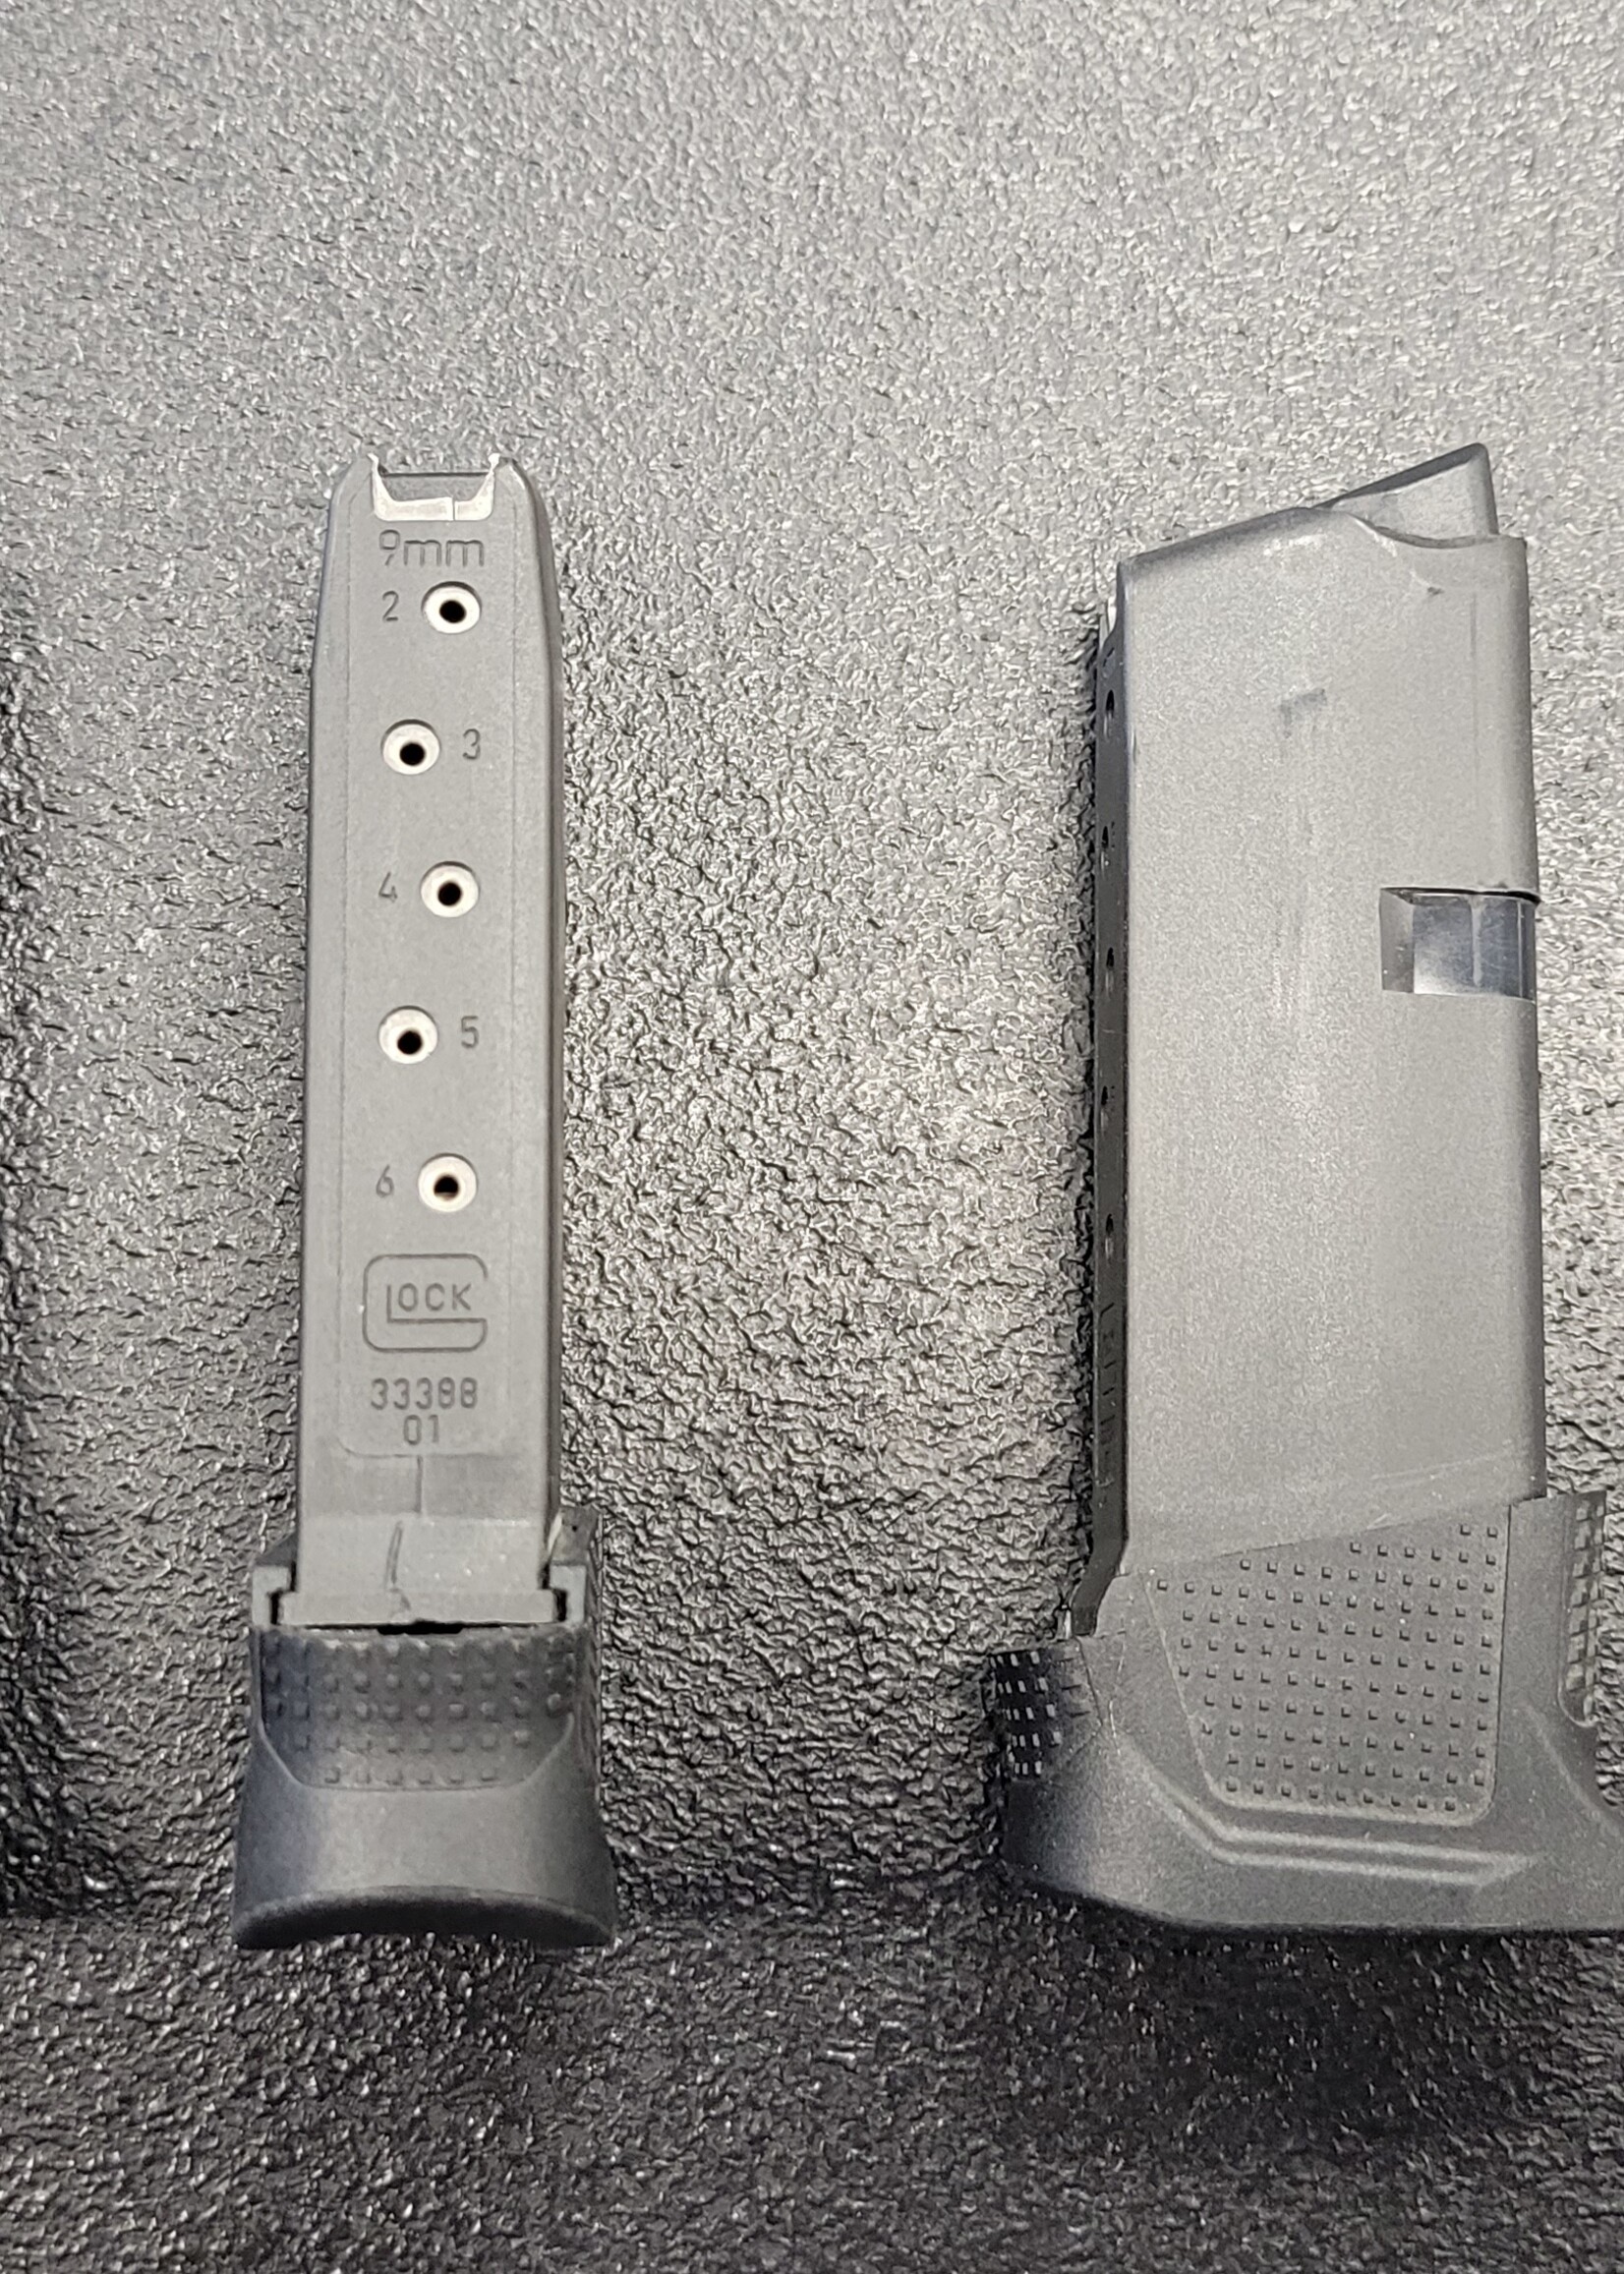 Glock (USED) Glock 43 With extended Magazines Holsters